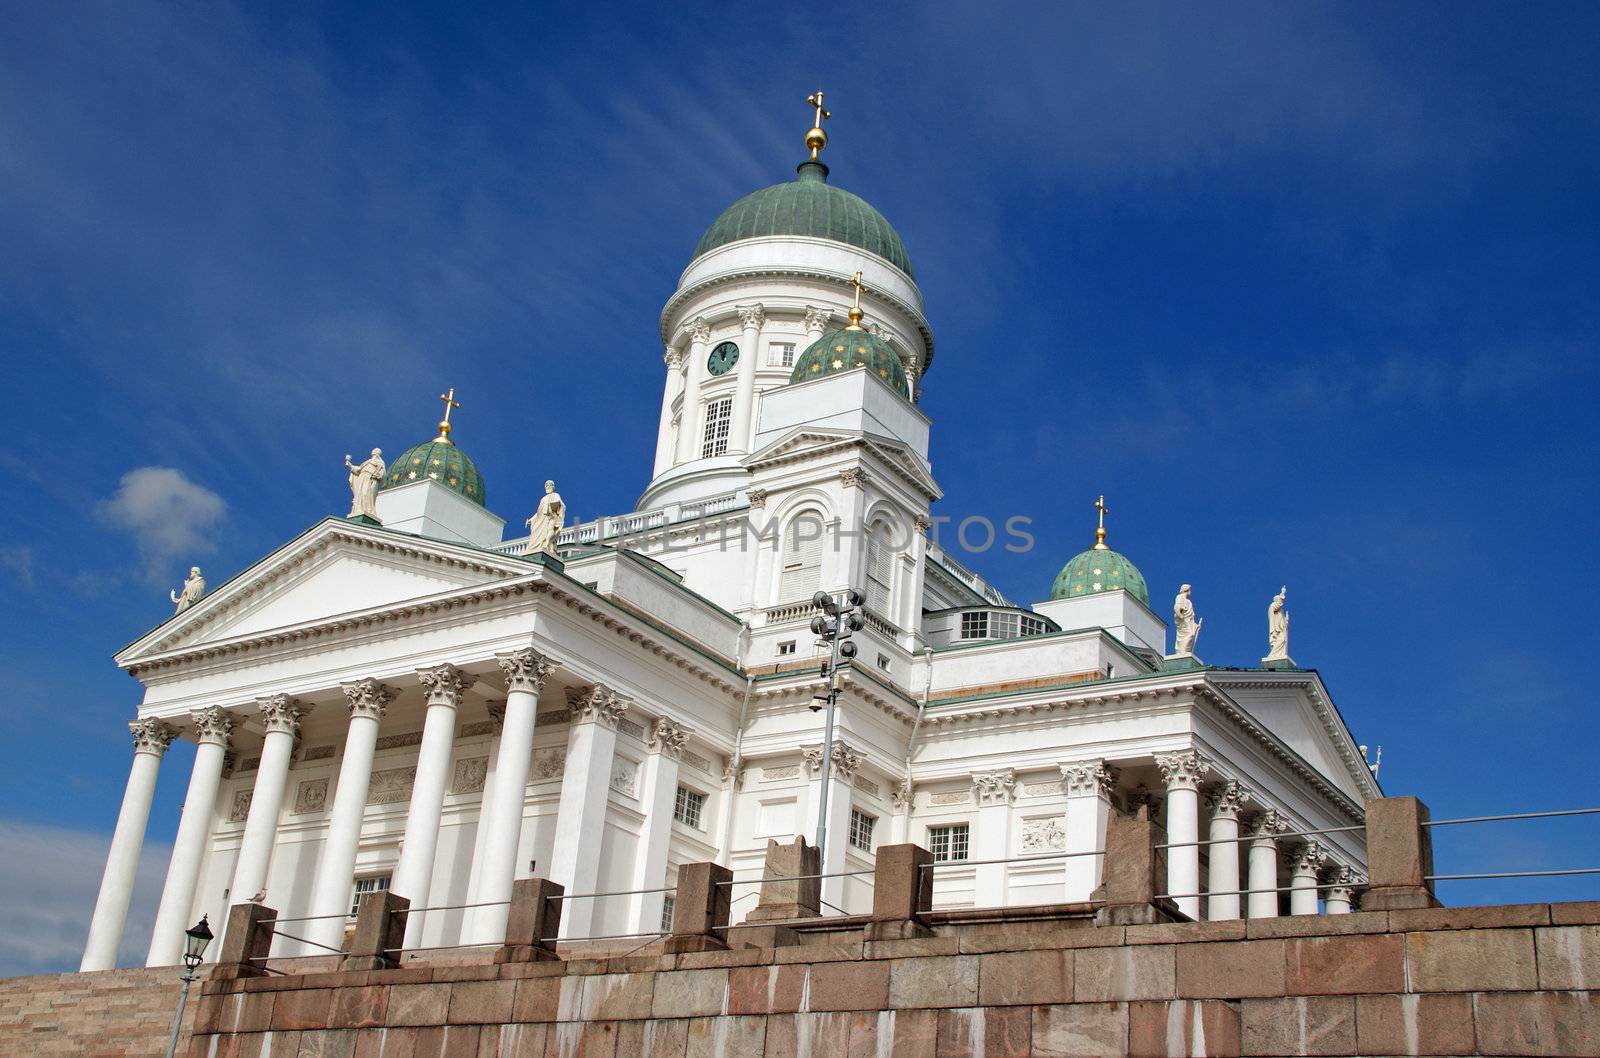 Helsinki Cathedral, the famous landmark in the capital of Finland.